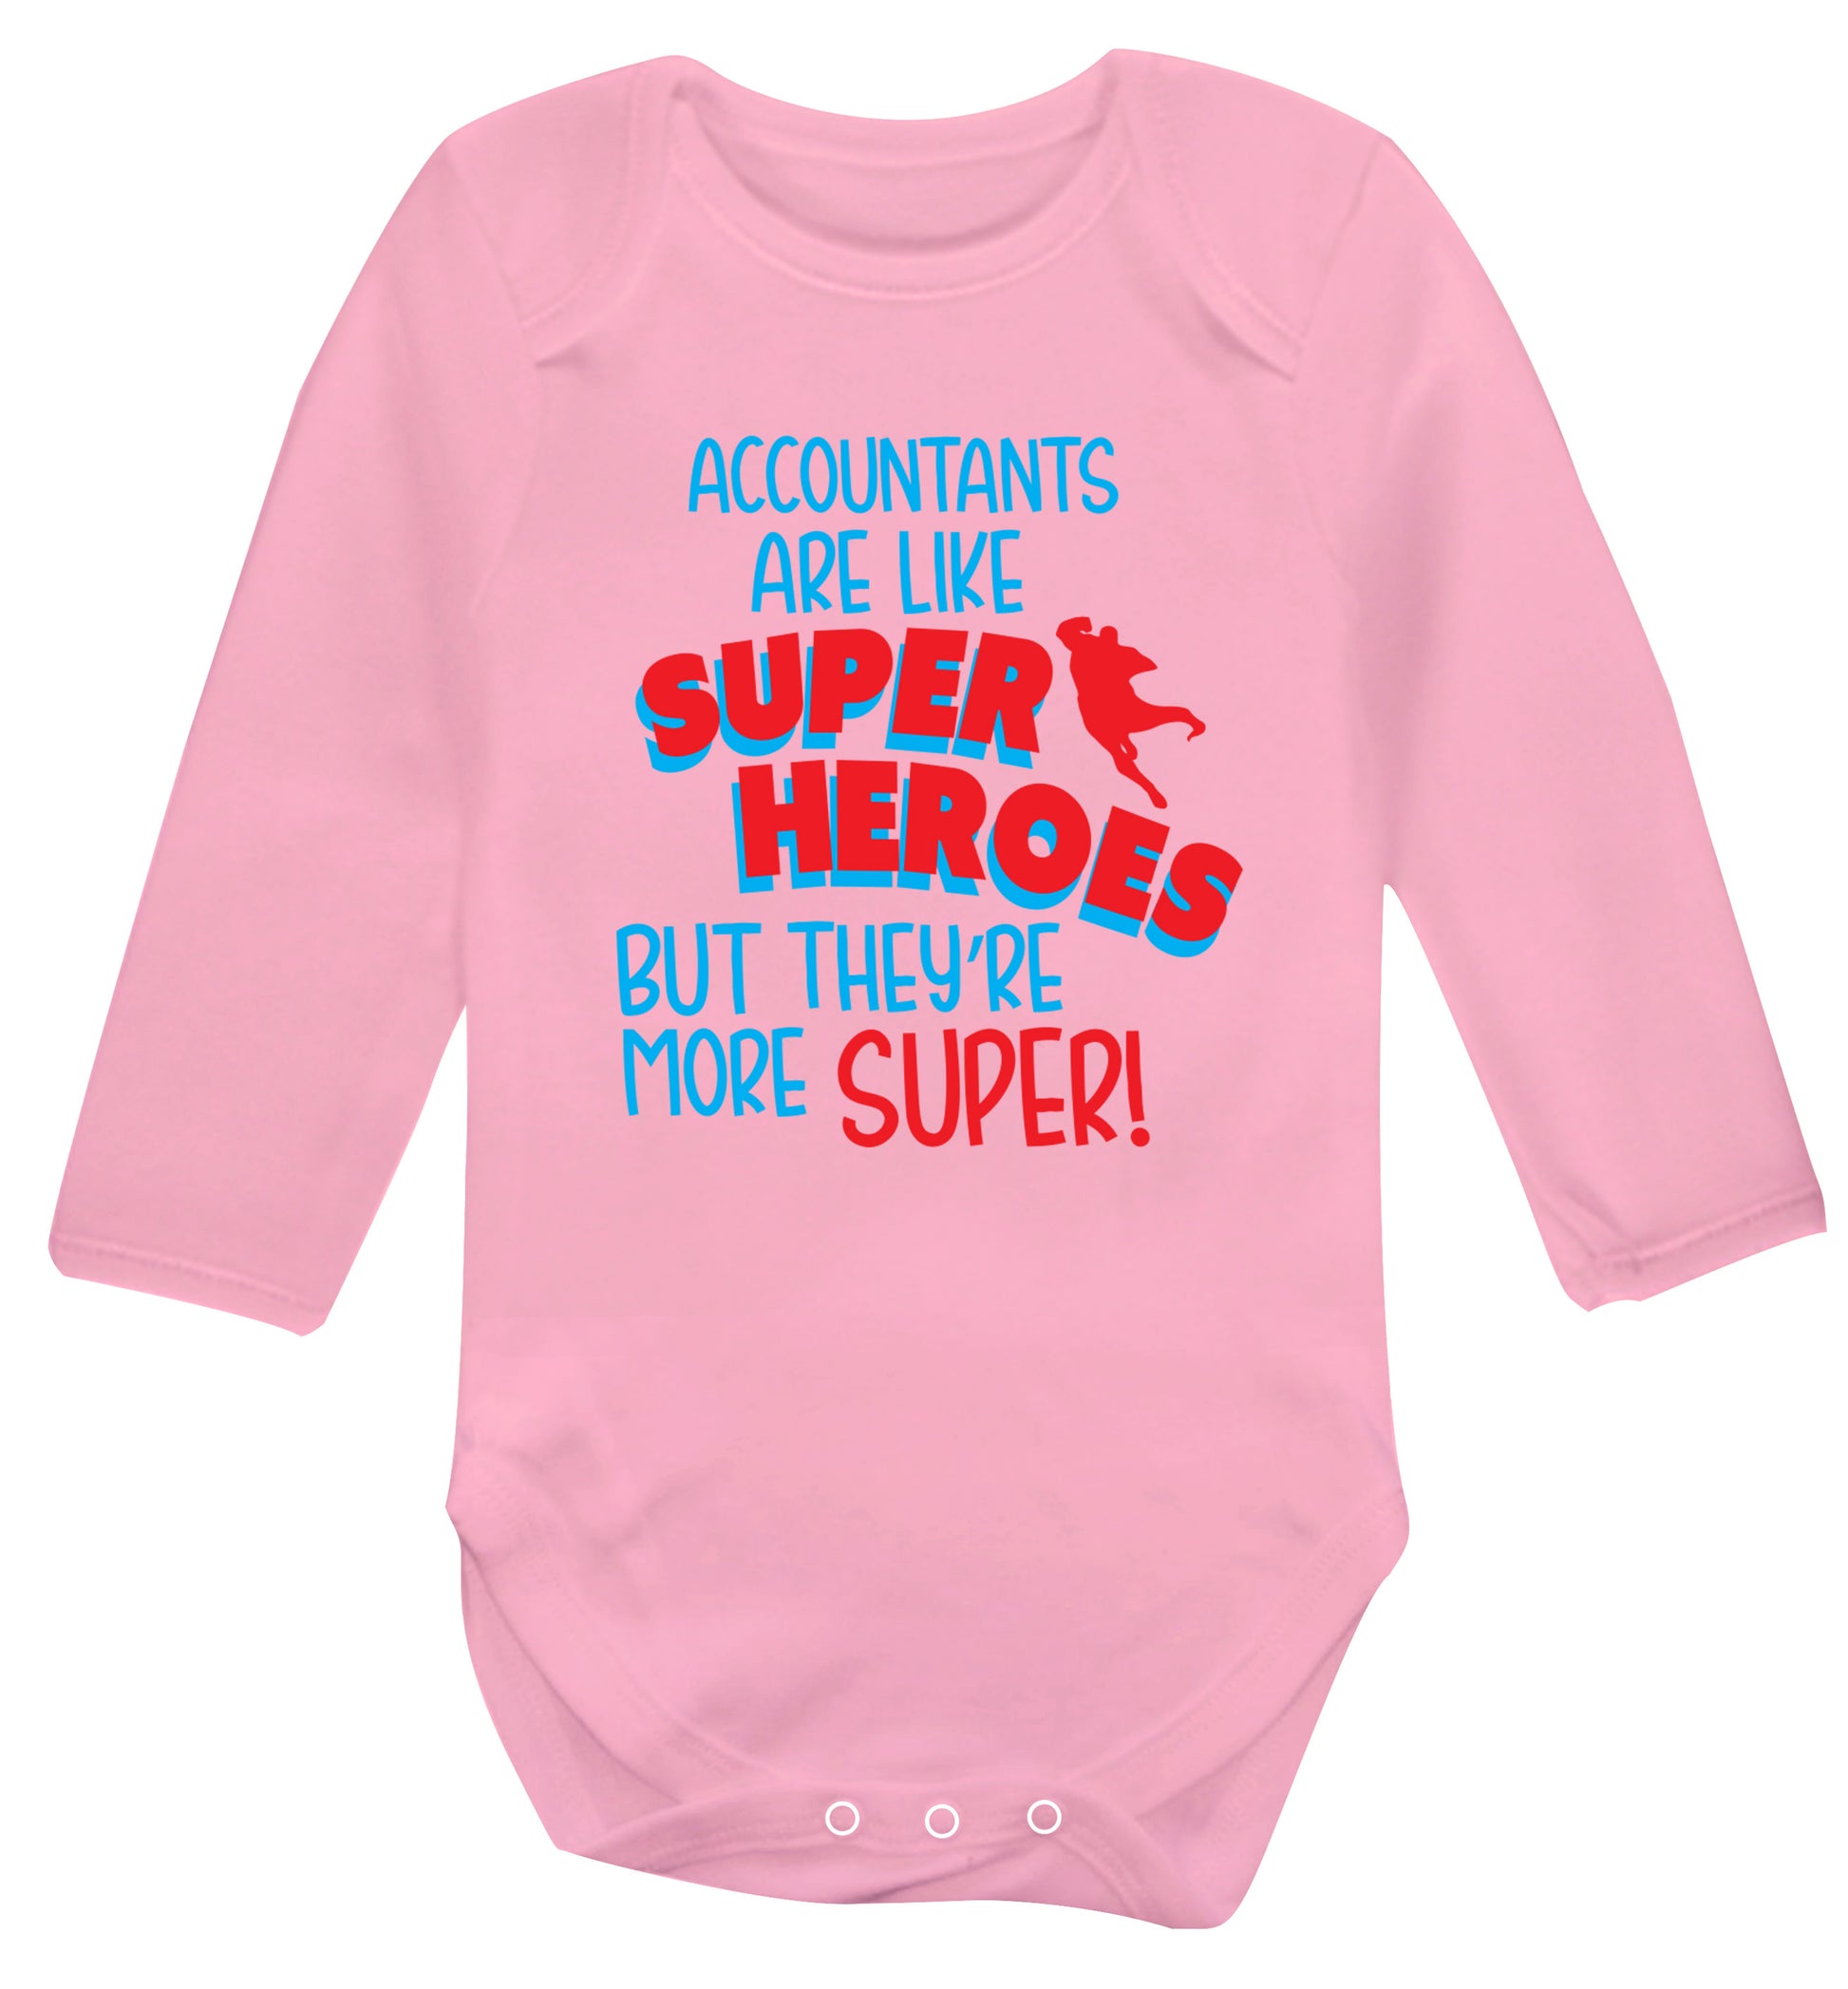 Accountants are like superheroes but they're more super Baby Vest long sleeved pale pink 6-12 months